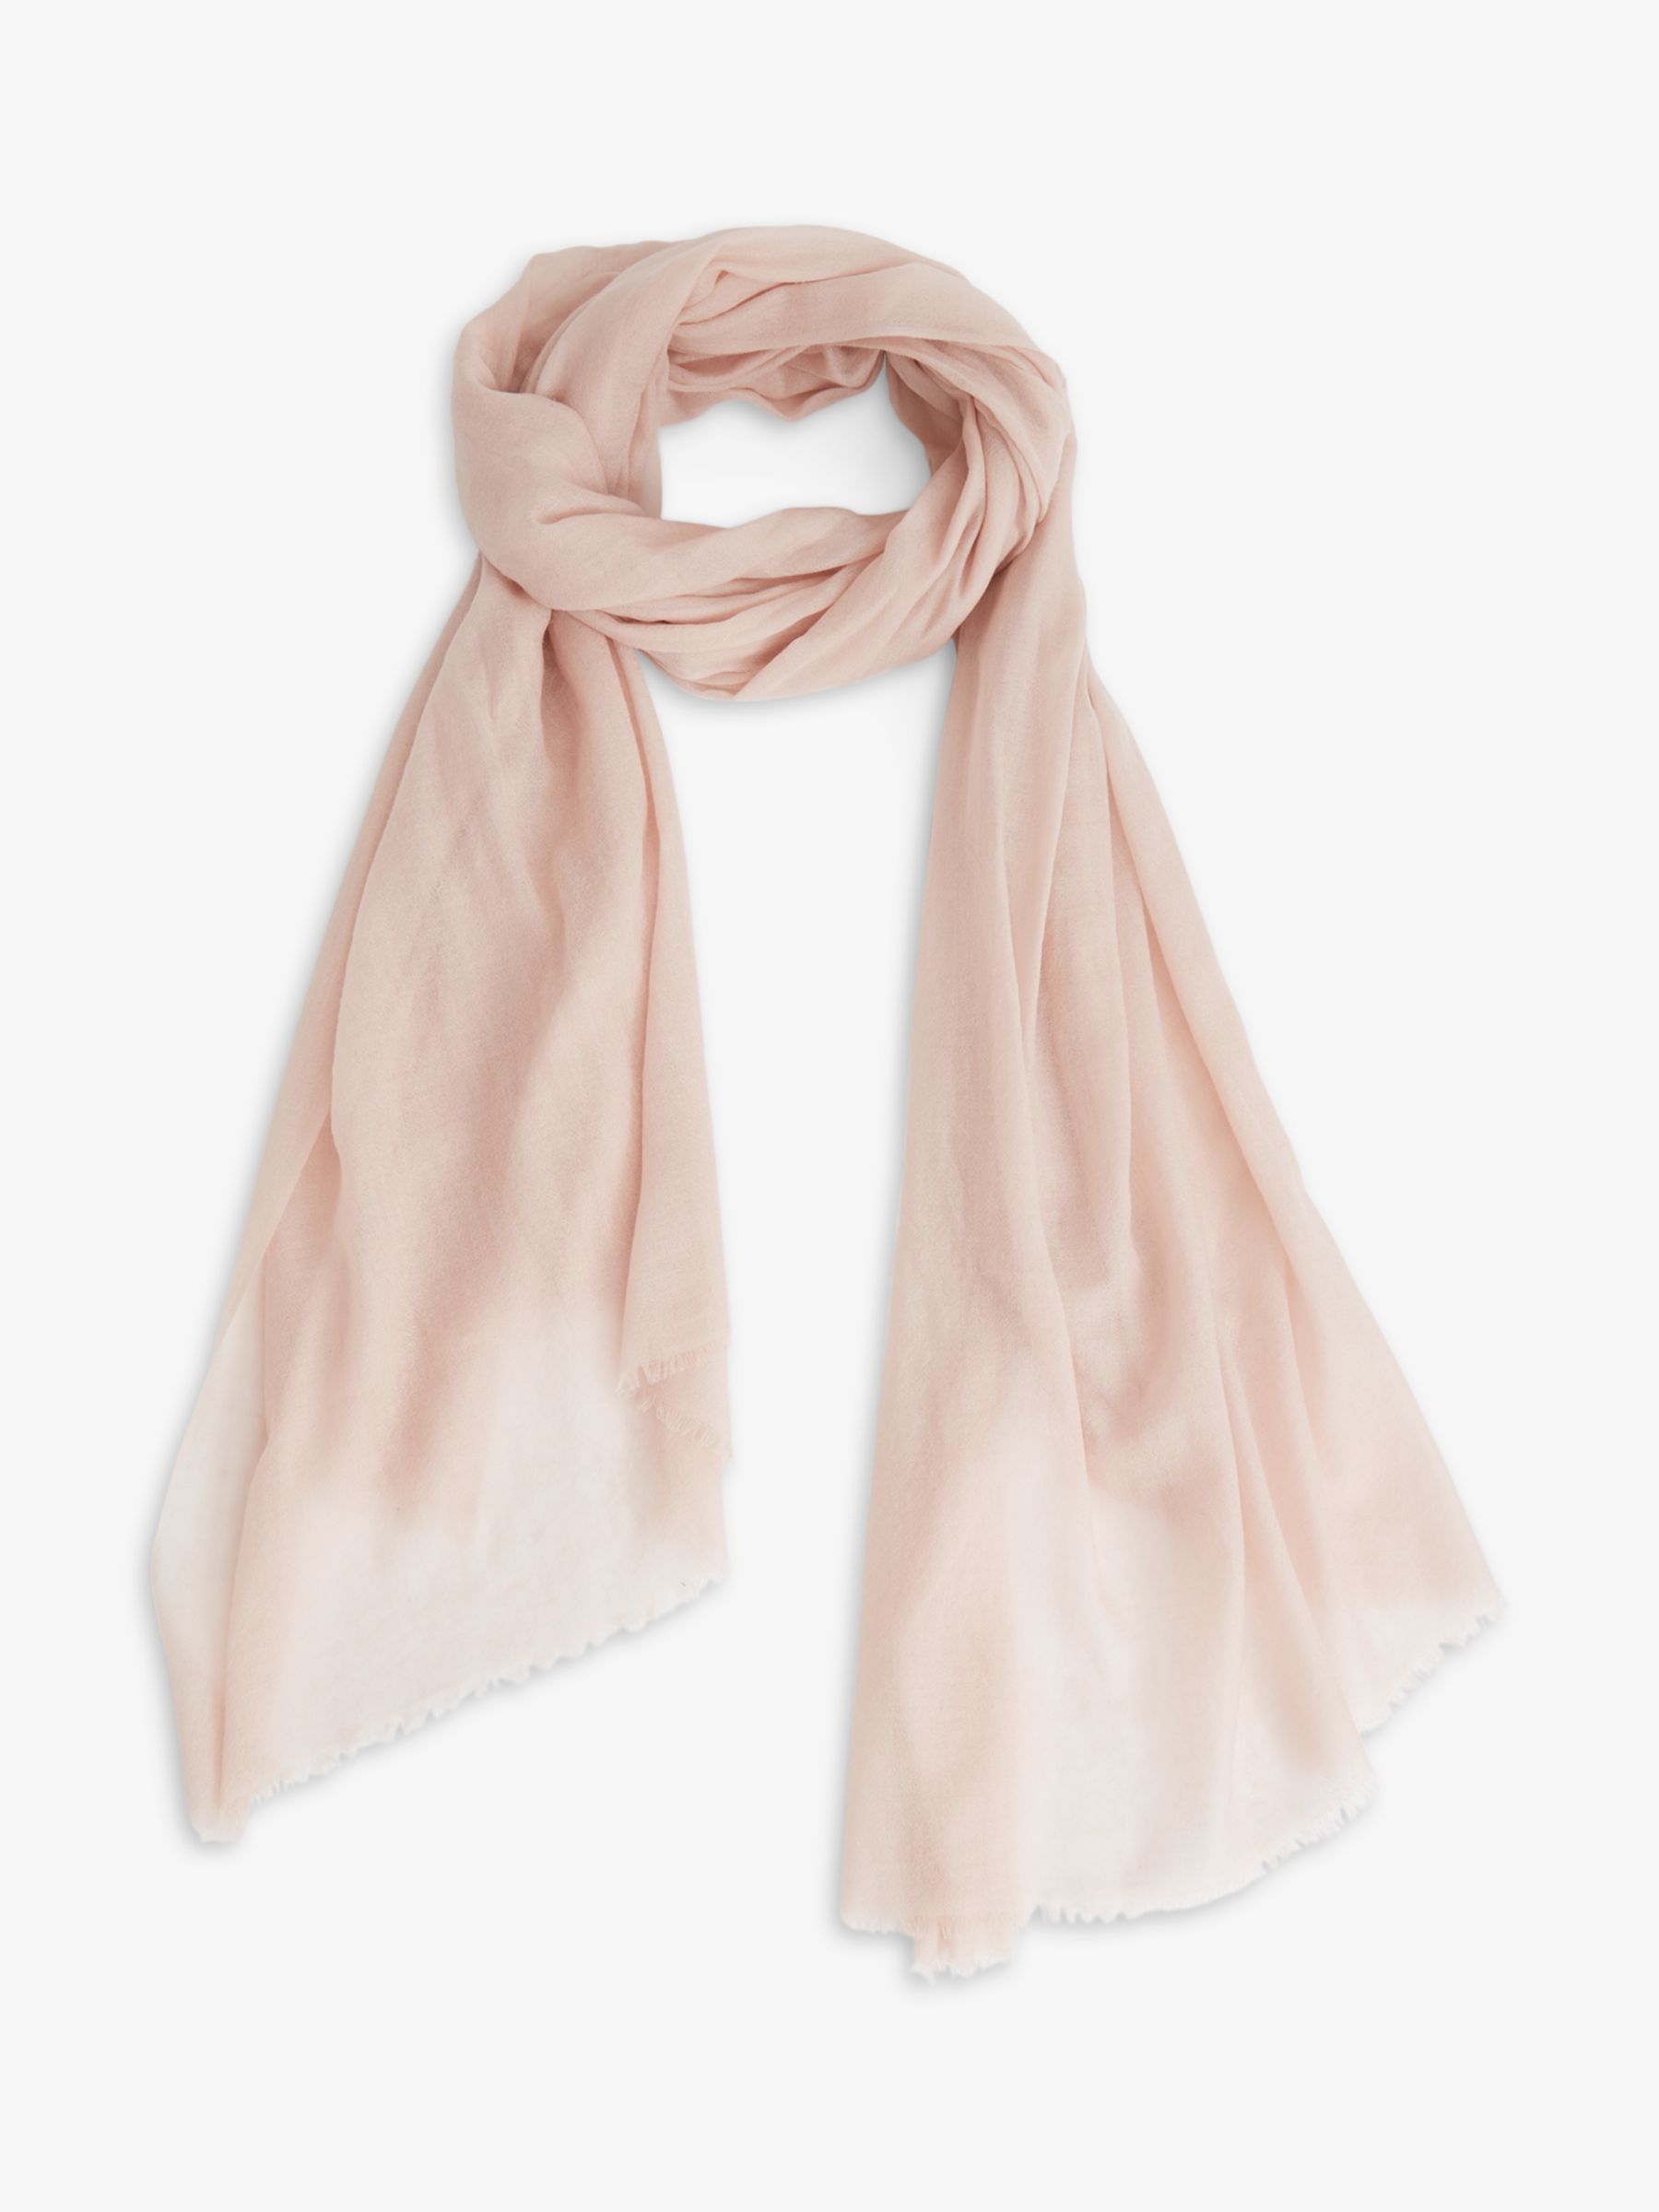 Reiss Heidi Wool and Cashmere Scarf, Blush, One Size